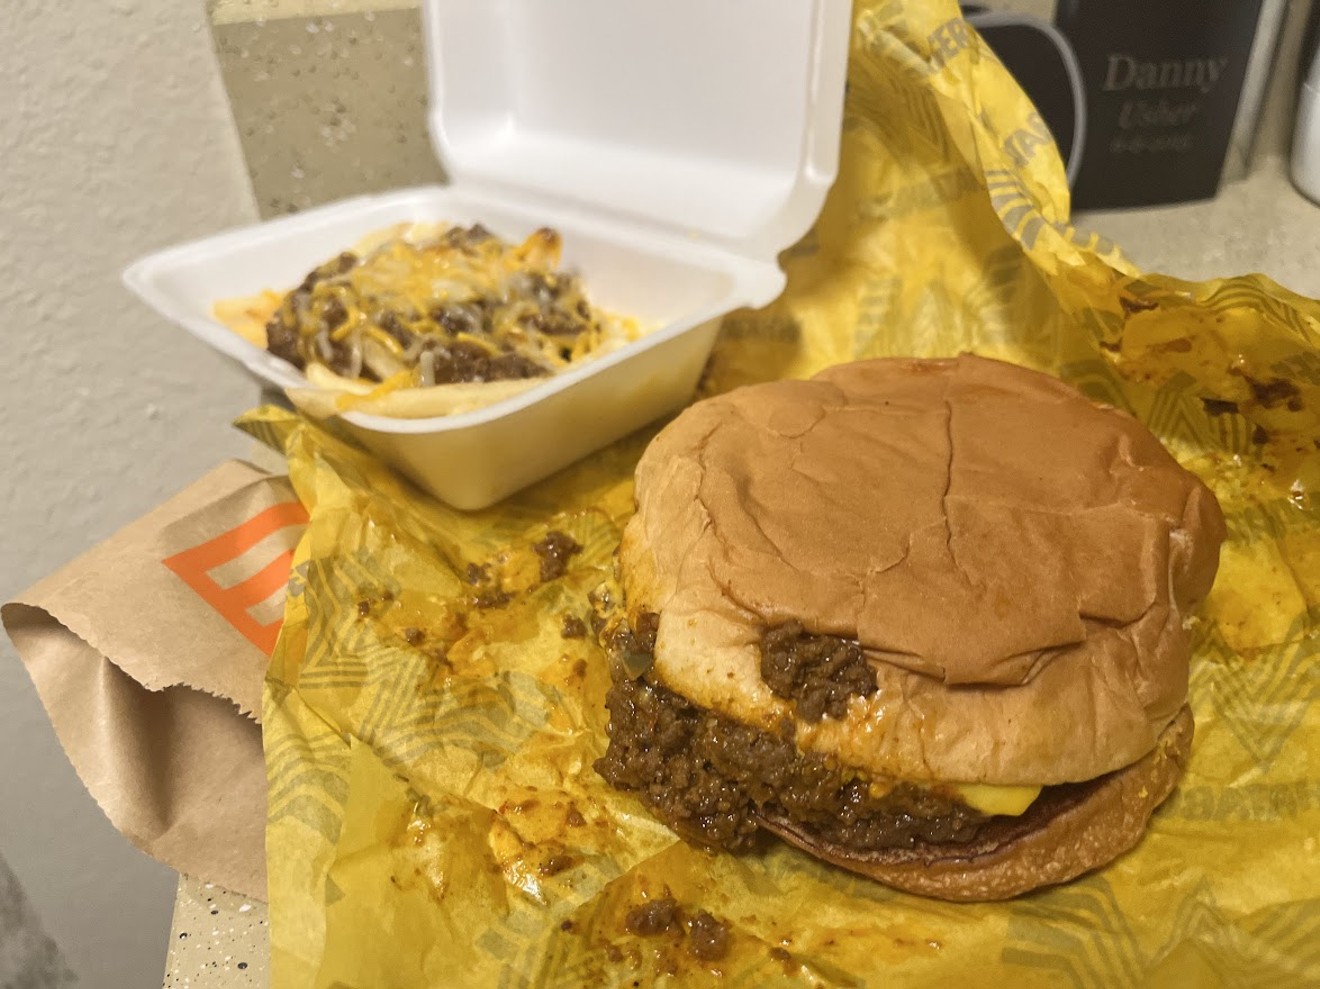 Whataburger's Chili Cheese Burger and Fries. It doesn't look pretty, but looks aren't everything.